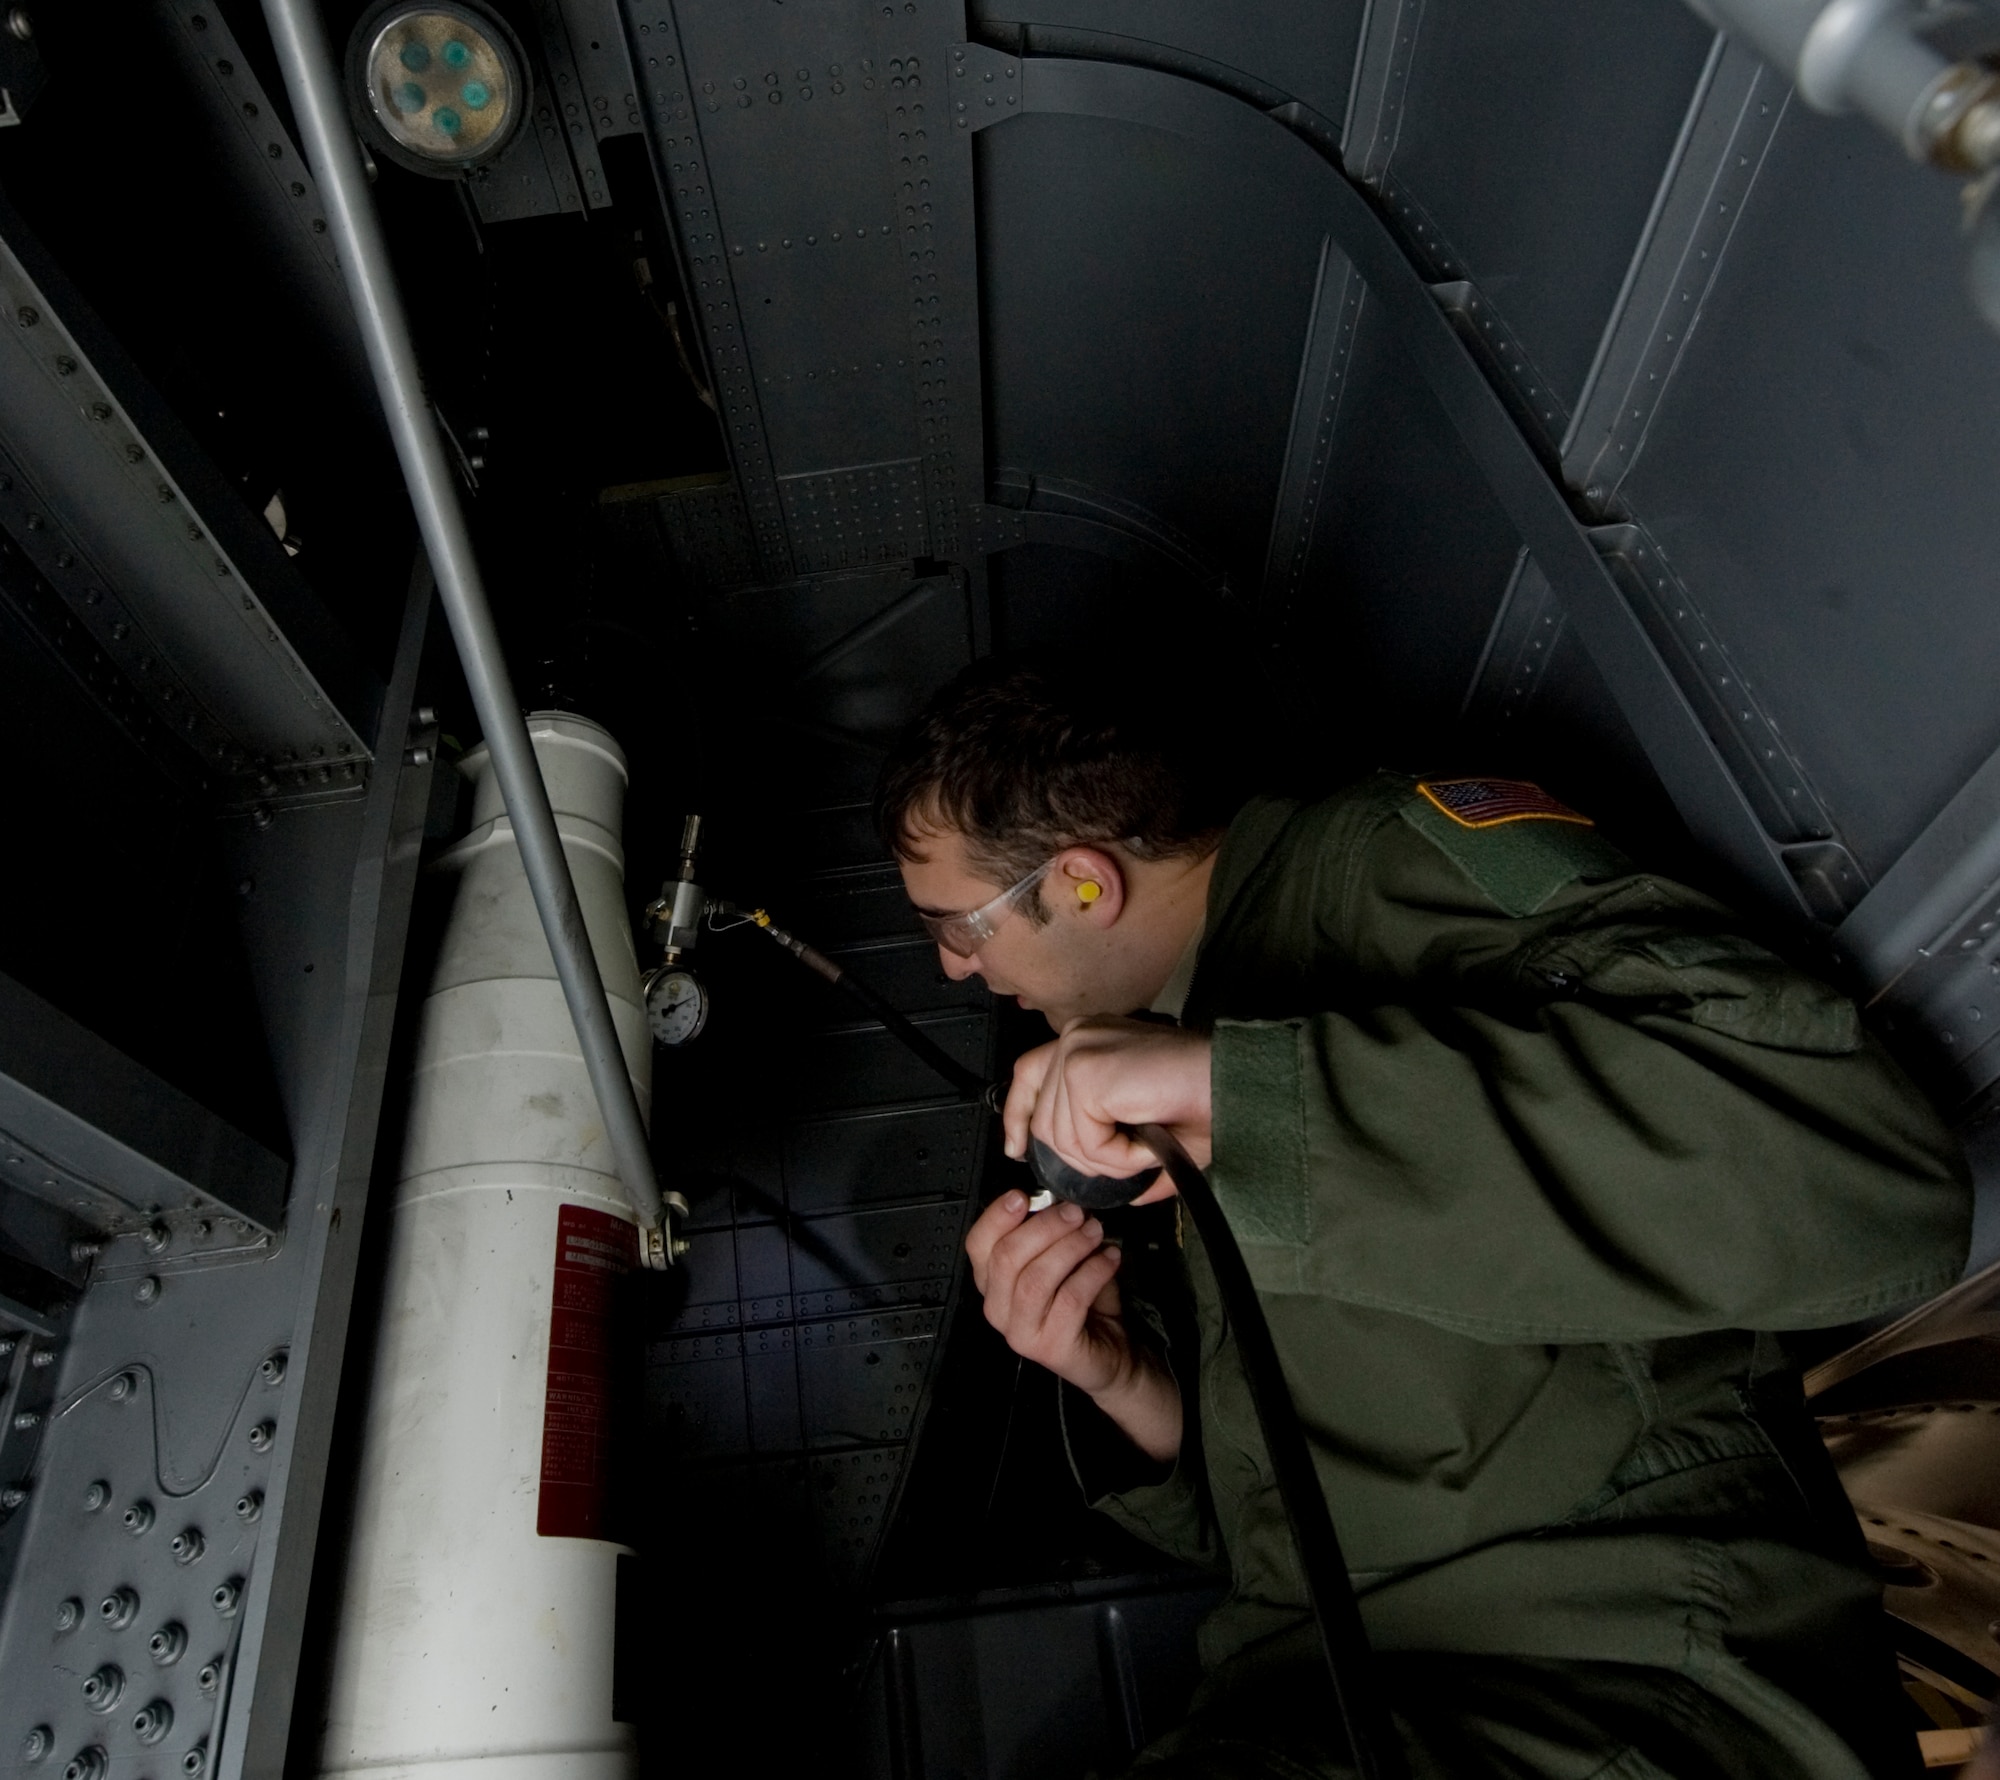 1st Lt. David Field, 39th Airlift Squadron, maintains a shock valve on a C-130J during Impact Day Dec. 7, 2012, at Dyess Air Force Base, Texas. Impact Day gave aircrew the opportunity to see what it takes to generate an aircraft with hands-on experience. The aircrew also learned how to pack a parachute, maintain a C-130J and repair a leak in a fuel cell. (U.S. Air Force photo by Airman 1st Class Jonathan Stefanko/ Released)